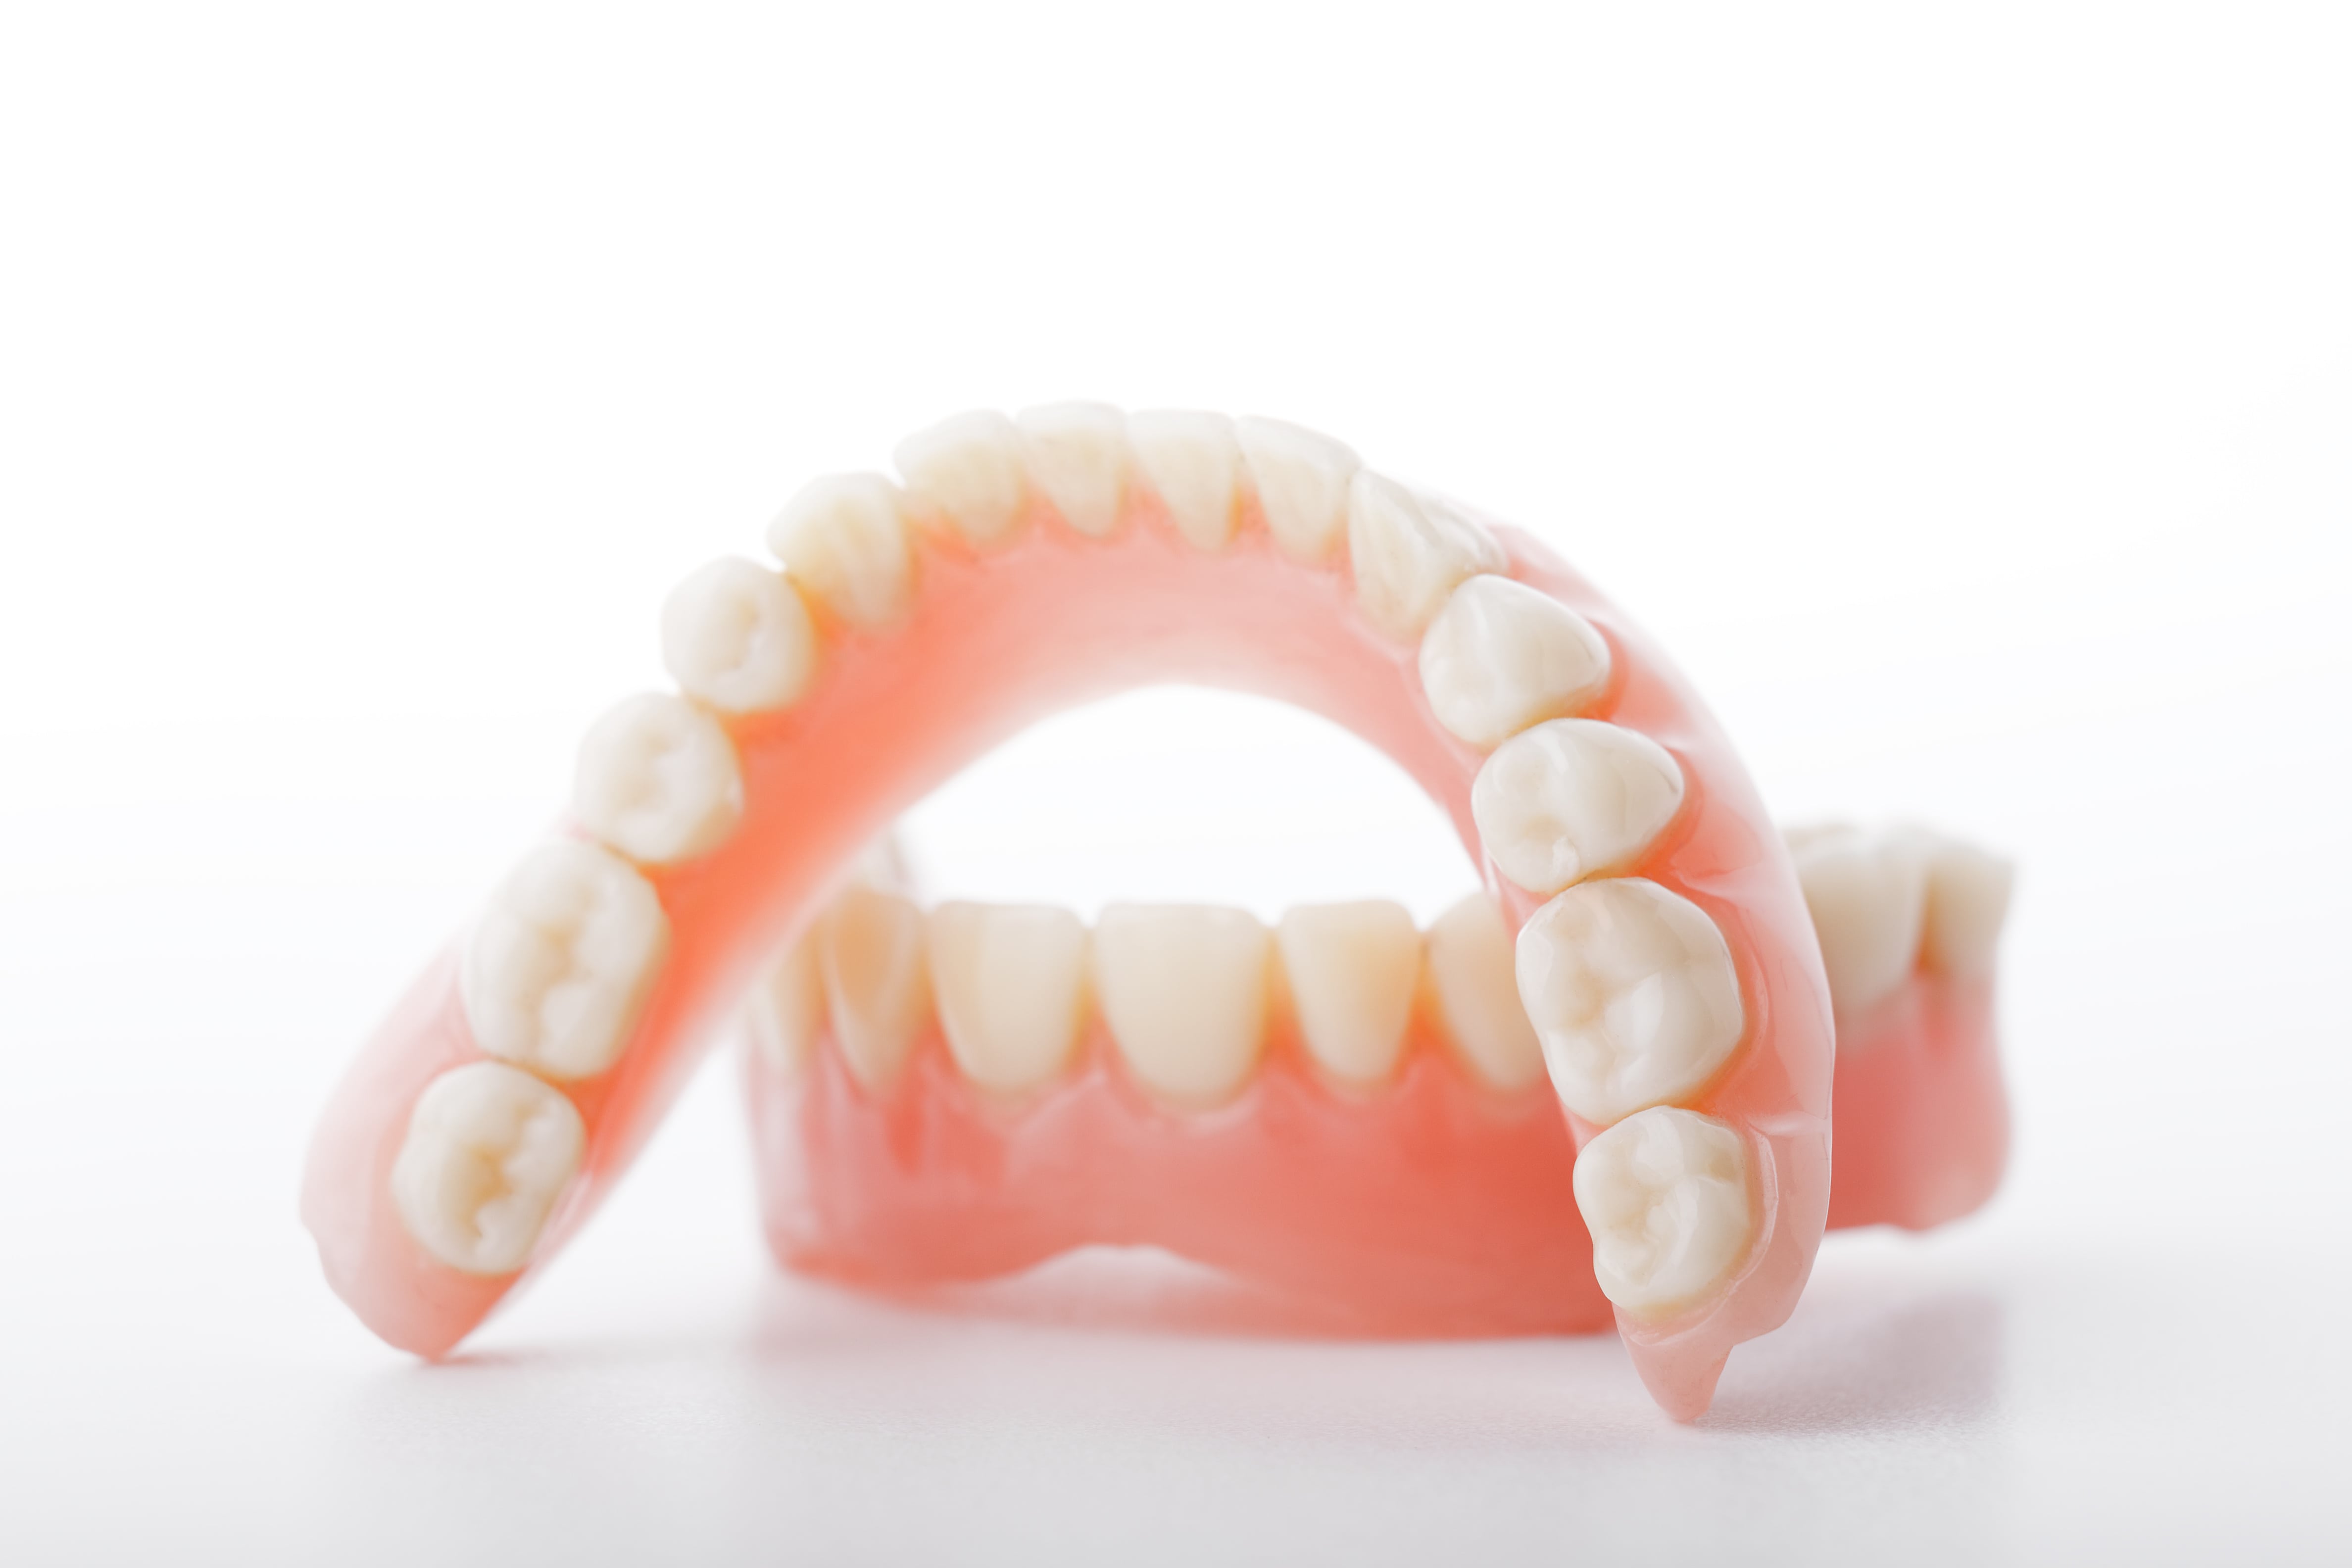 Get your smile back with dentures